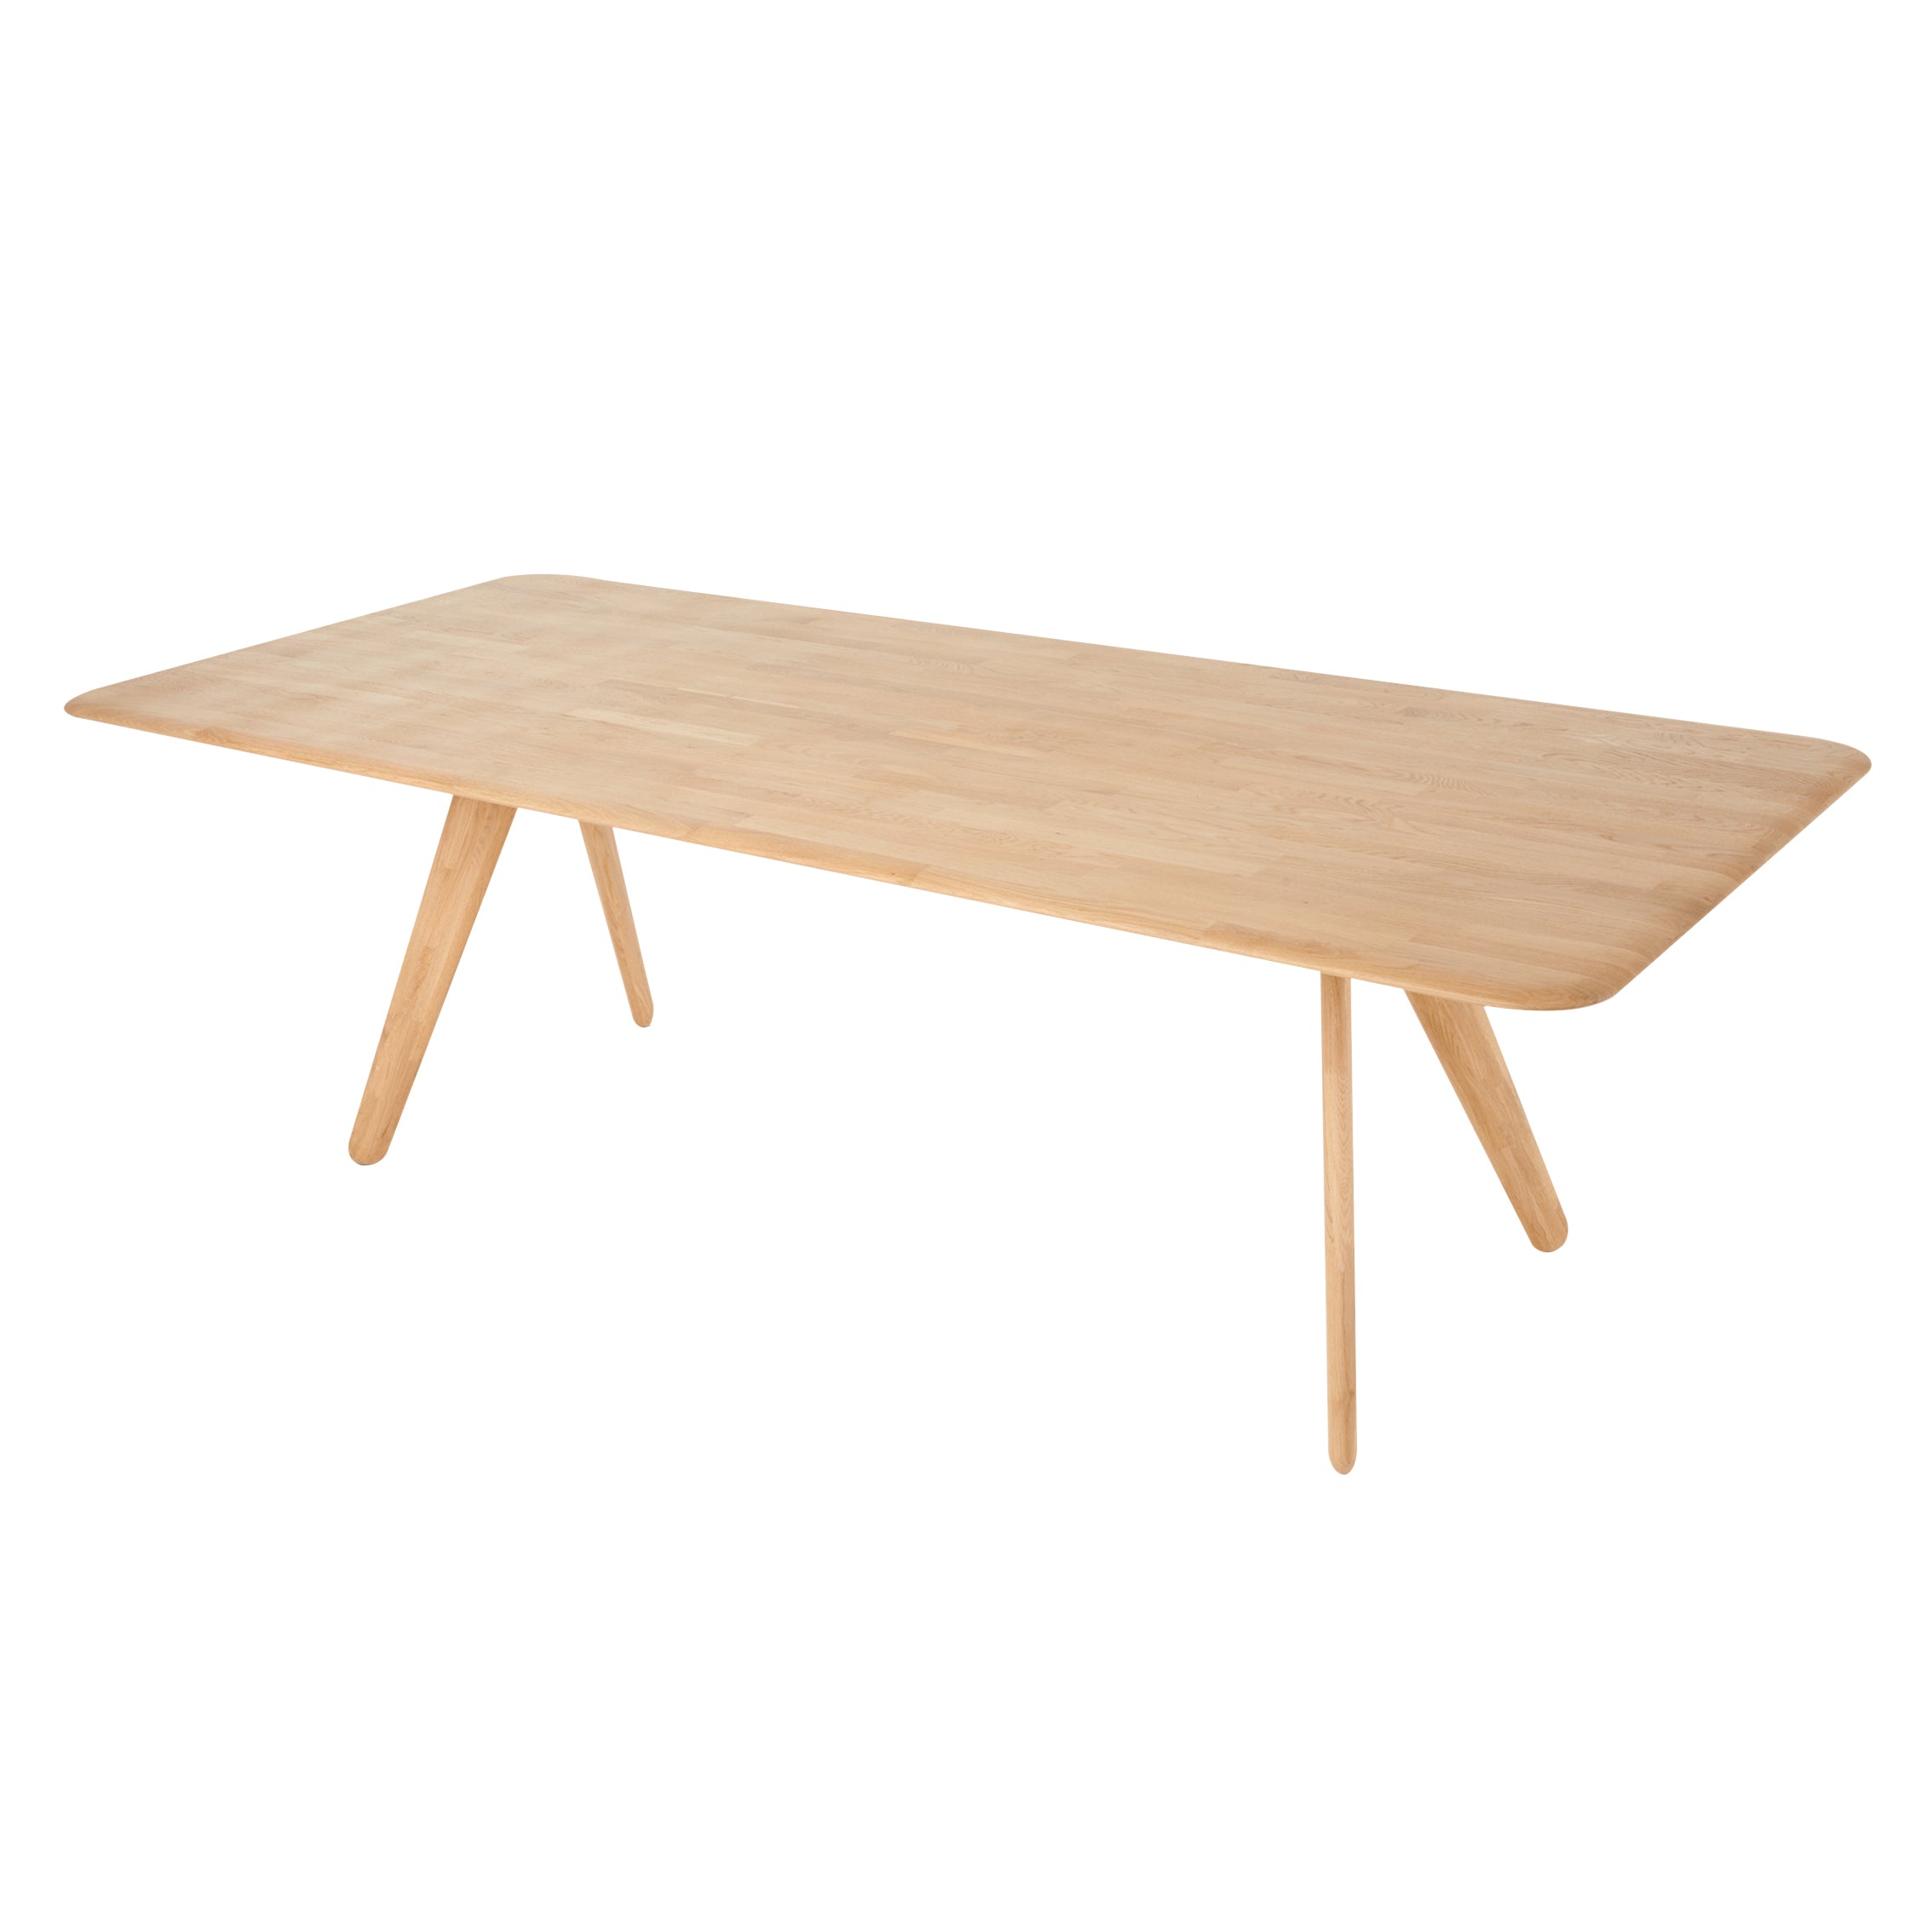 Slab Dining Table: Large - 94.5